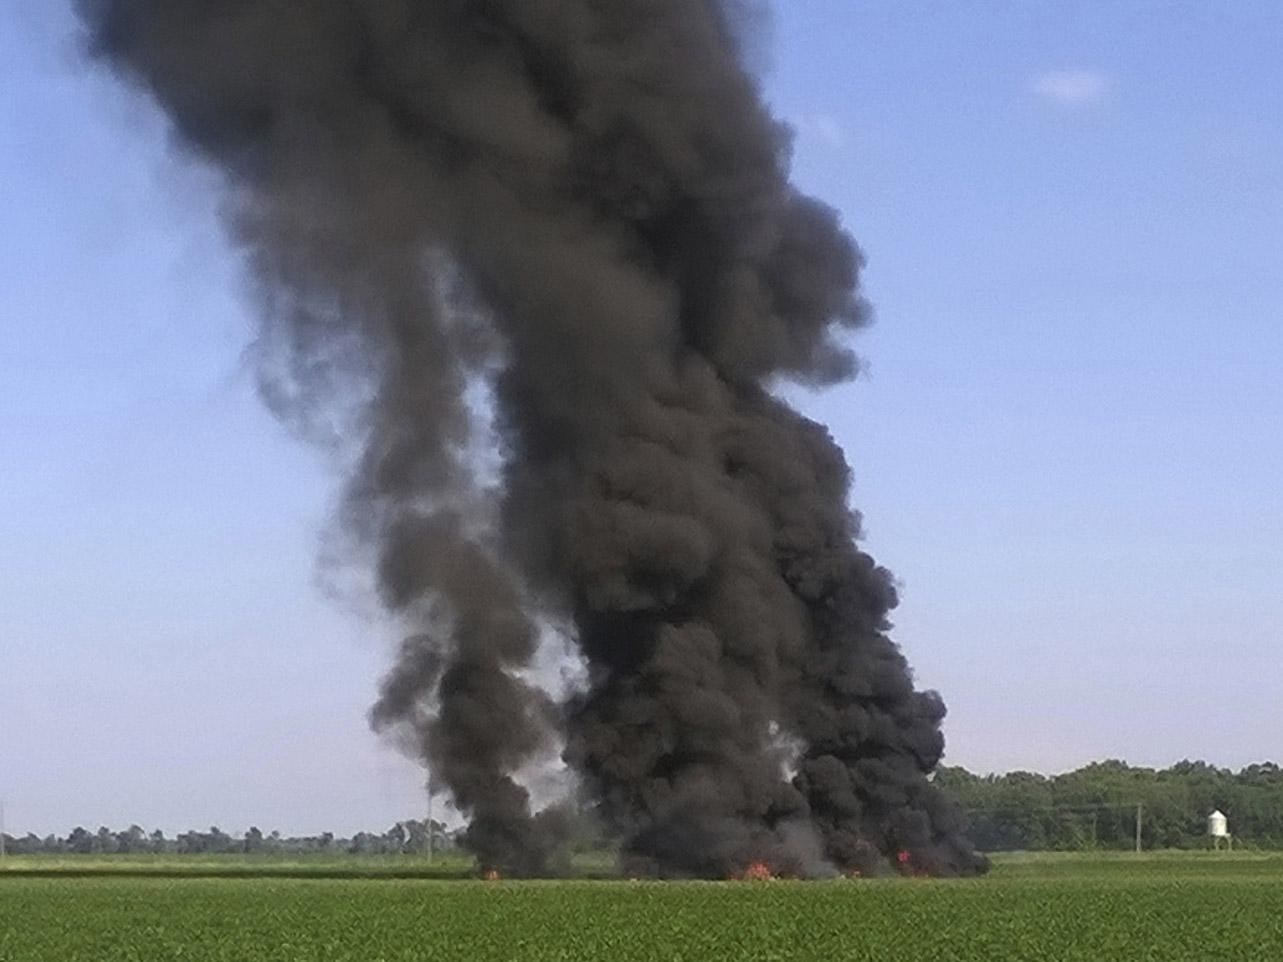 Smoke and flames rise into the air after a military transport airplane crashed in a field near Itta Bena, Mississippi, on the western edge of Leflore County killing several